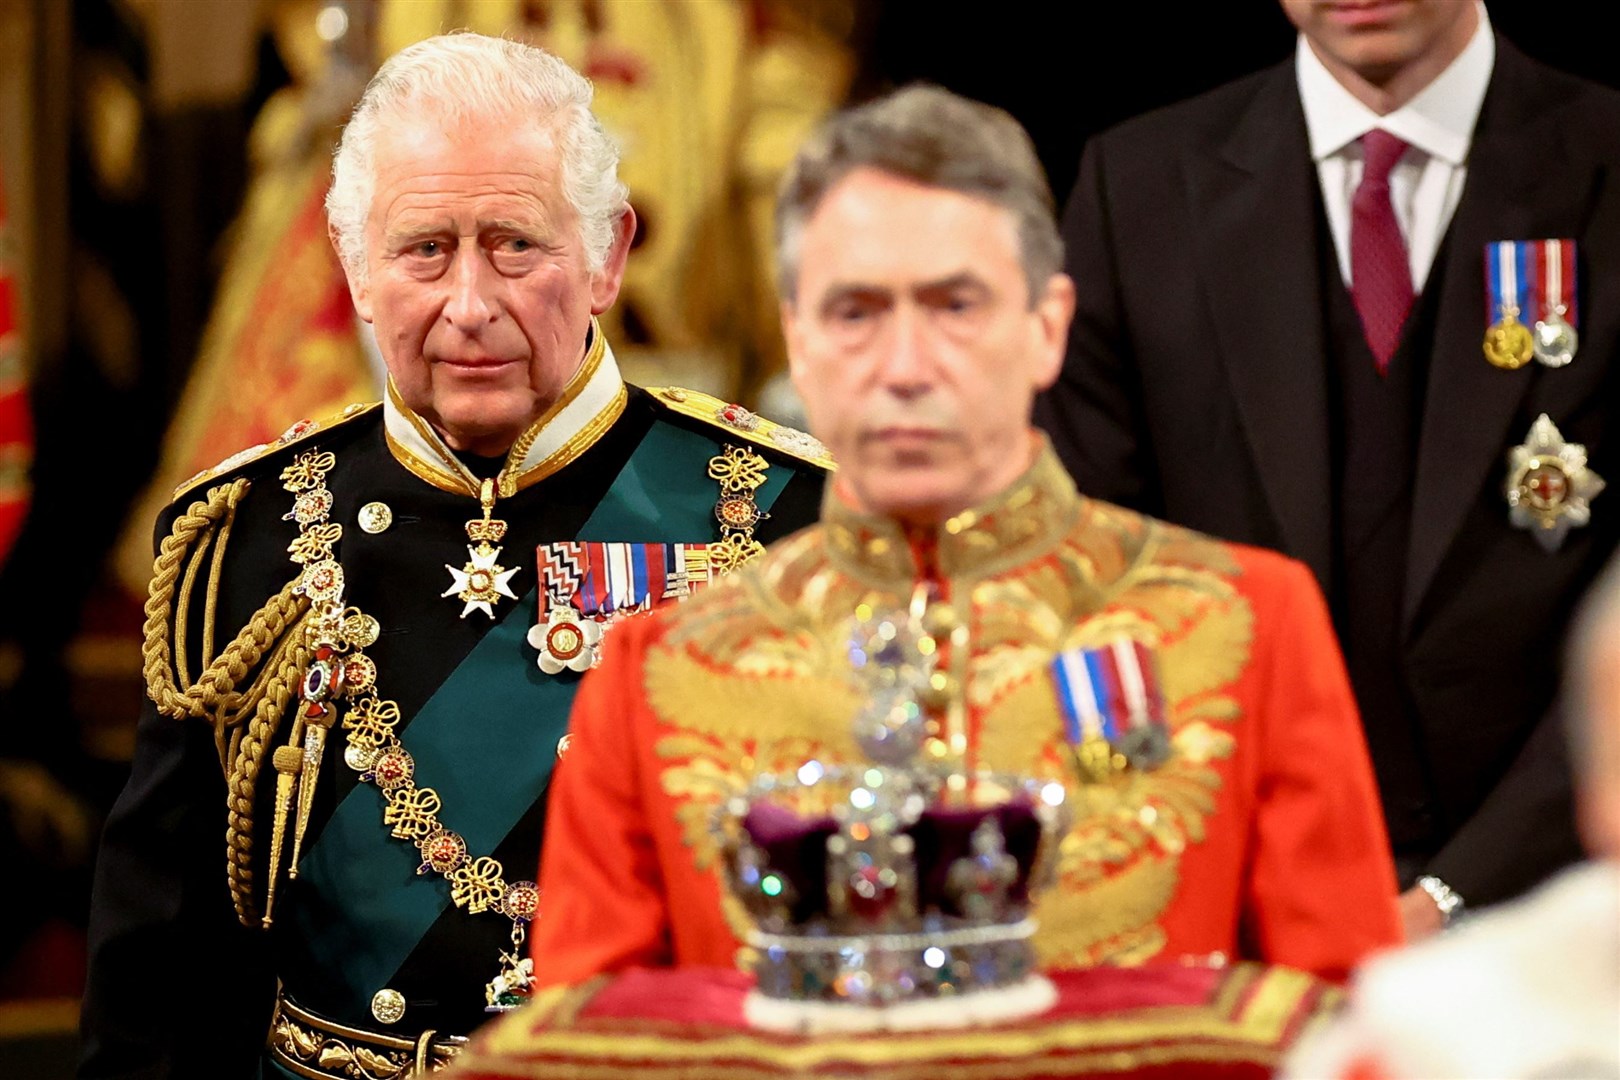 The Prince of Wales processes behind the Imperial State Crown through the Royal Gallery (Hannah McKay/PA)